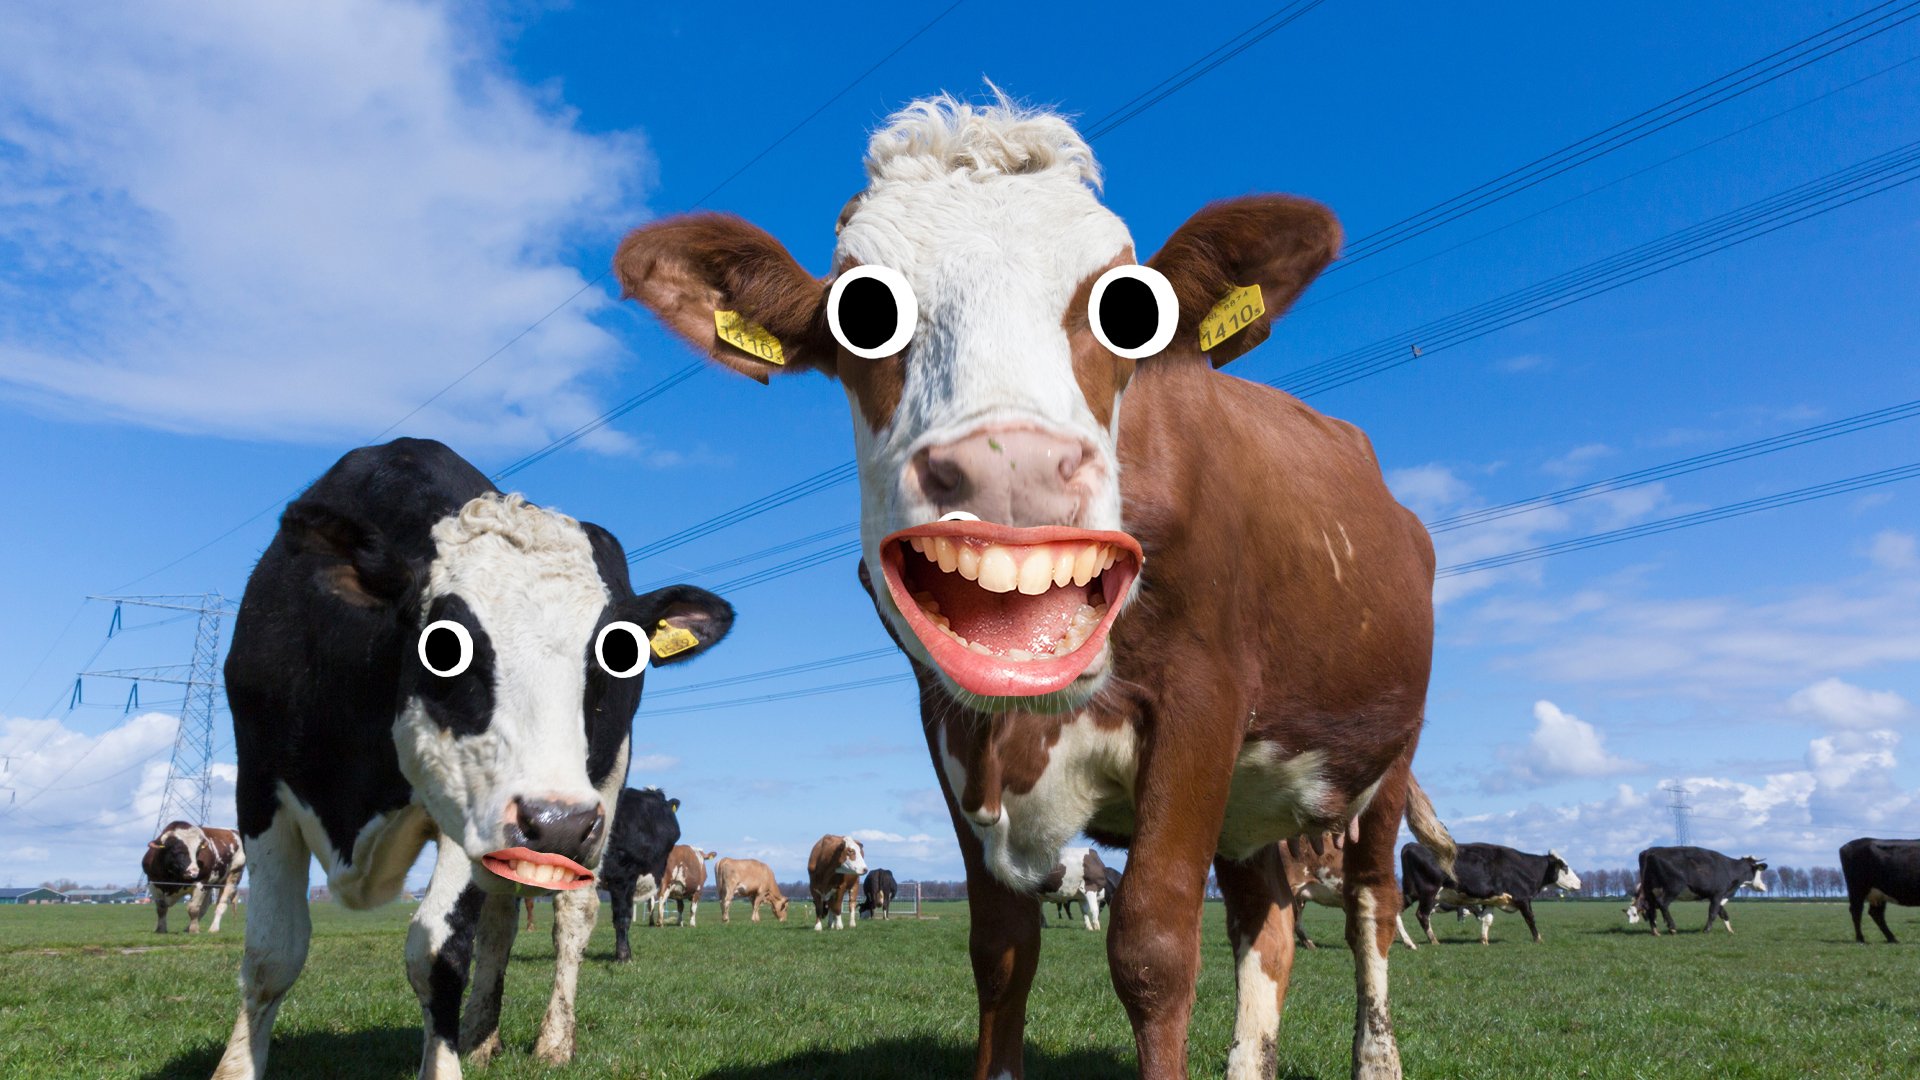 A cow laughing